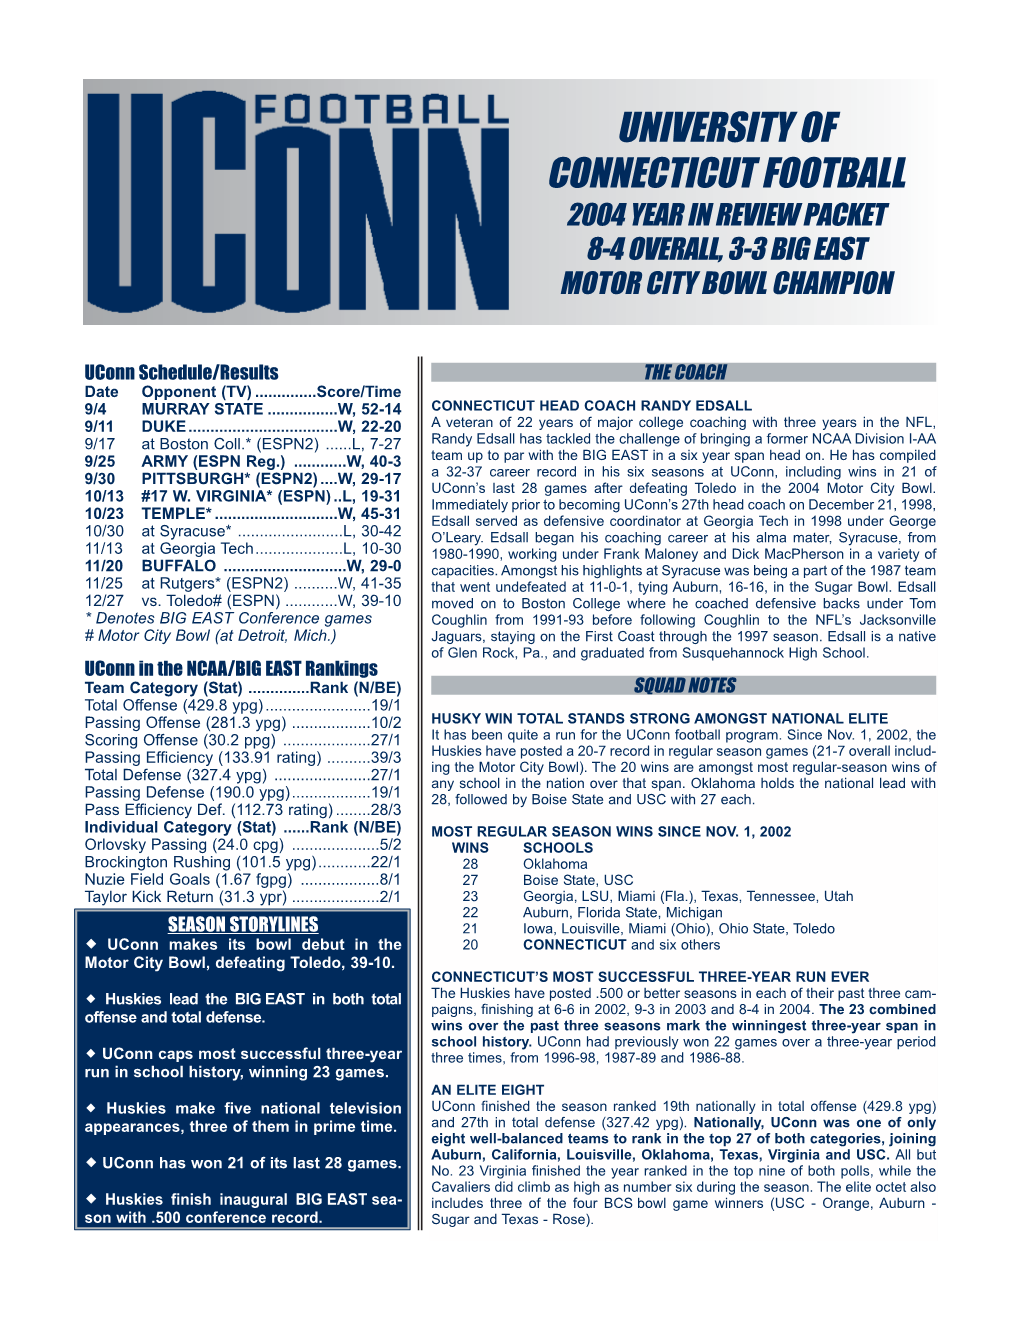 University of Connecticut Football 2004 Year in Review Packet 8-4 Overall, 3-3 Big East Motor City Bowl Champion